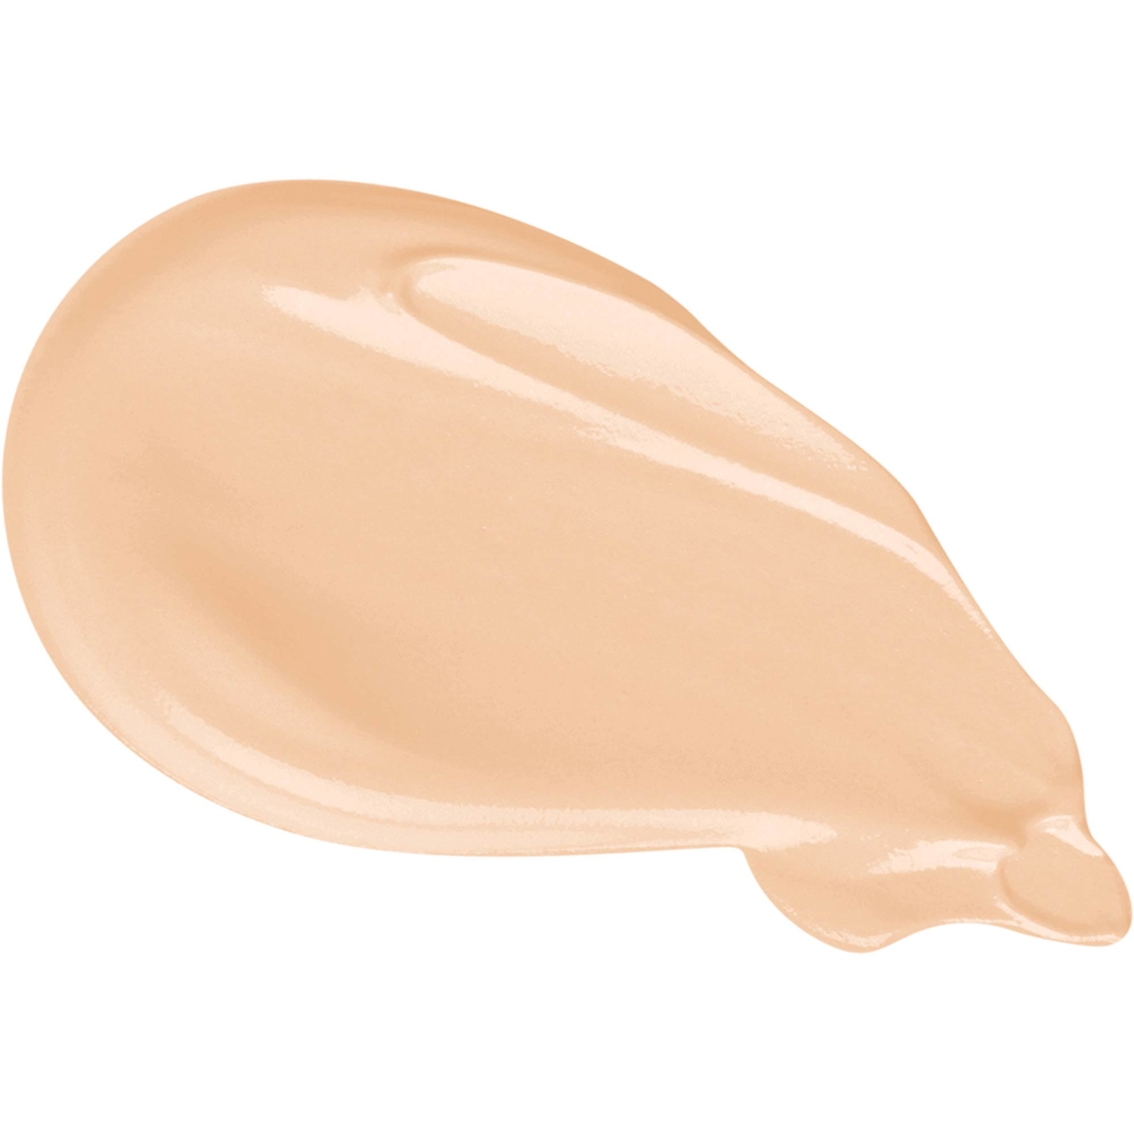 Too Faced Born This Way Super Coverage Multi Use Sculpting Concealer - Image 4 of 4